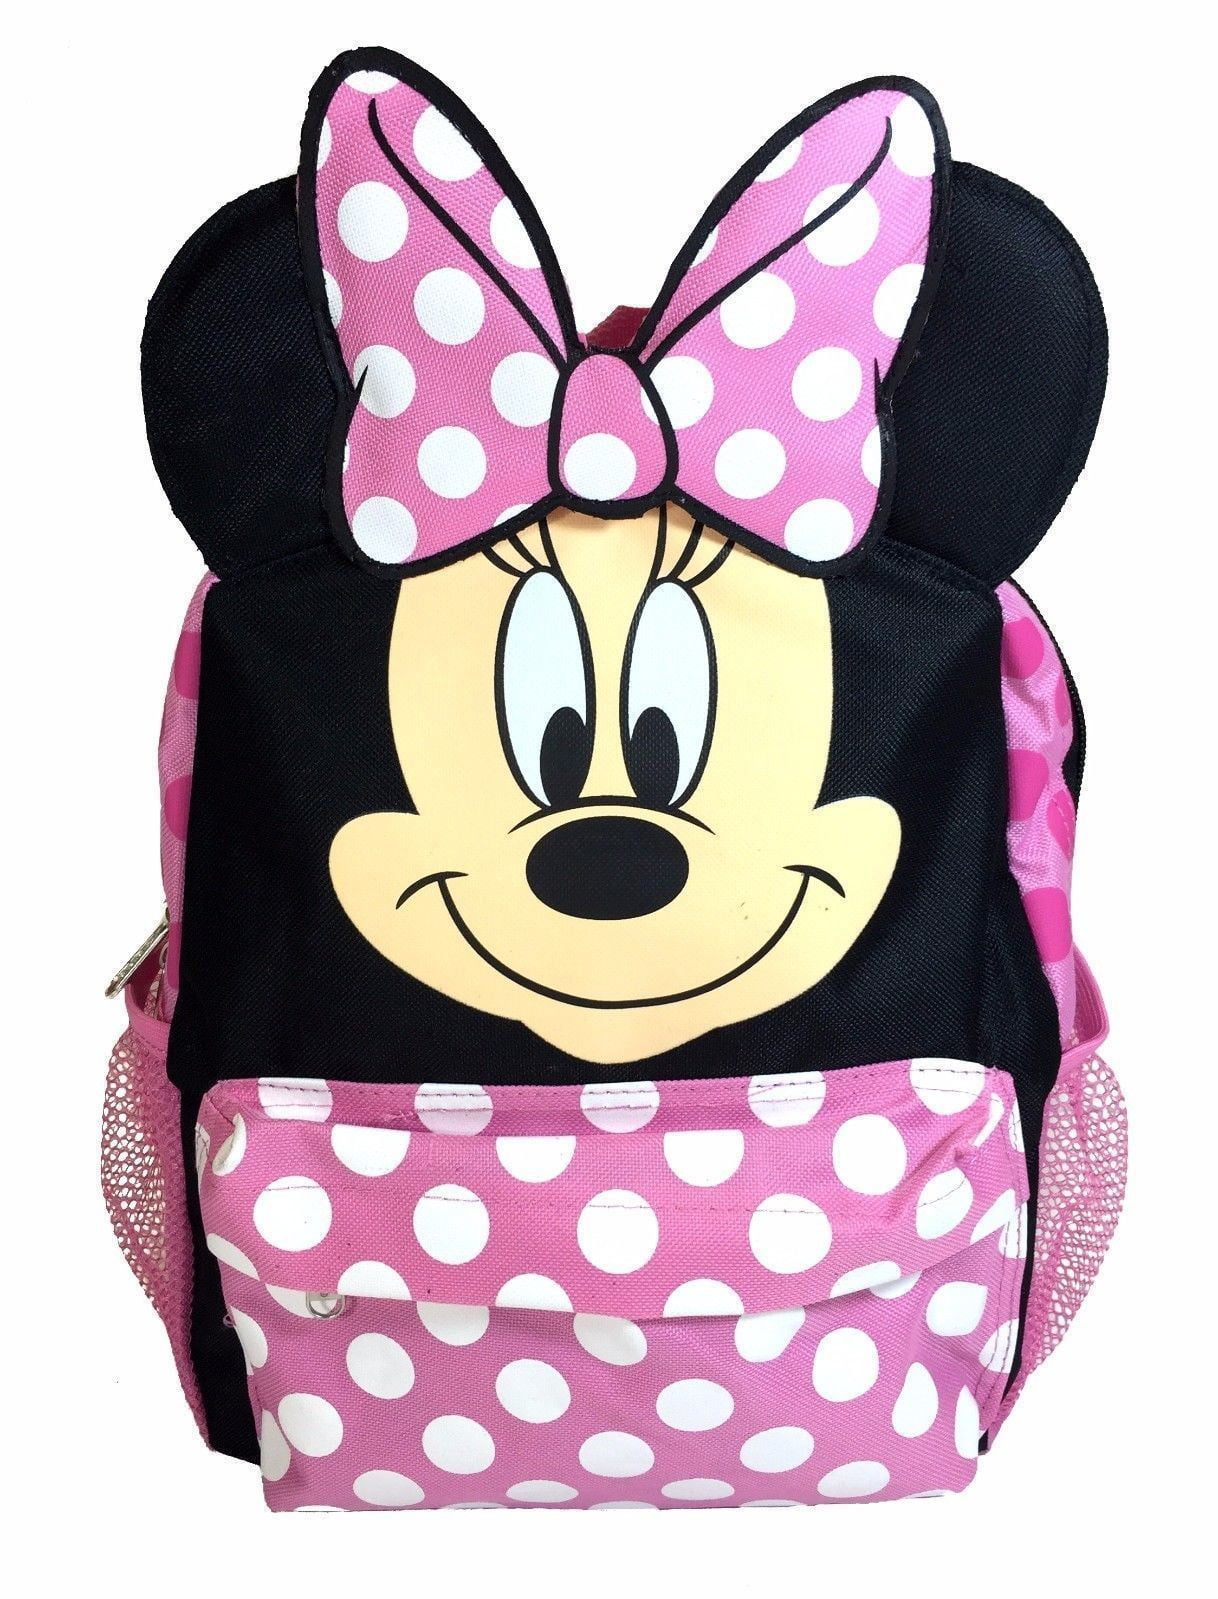 12" Disney Minnie Mouse Face Back to School Backpack with 3D Ear 